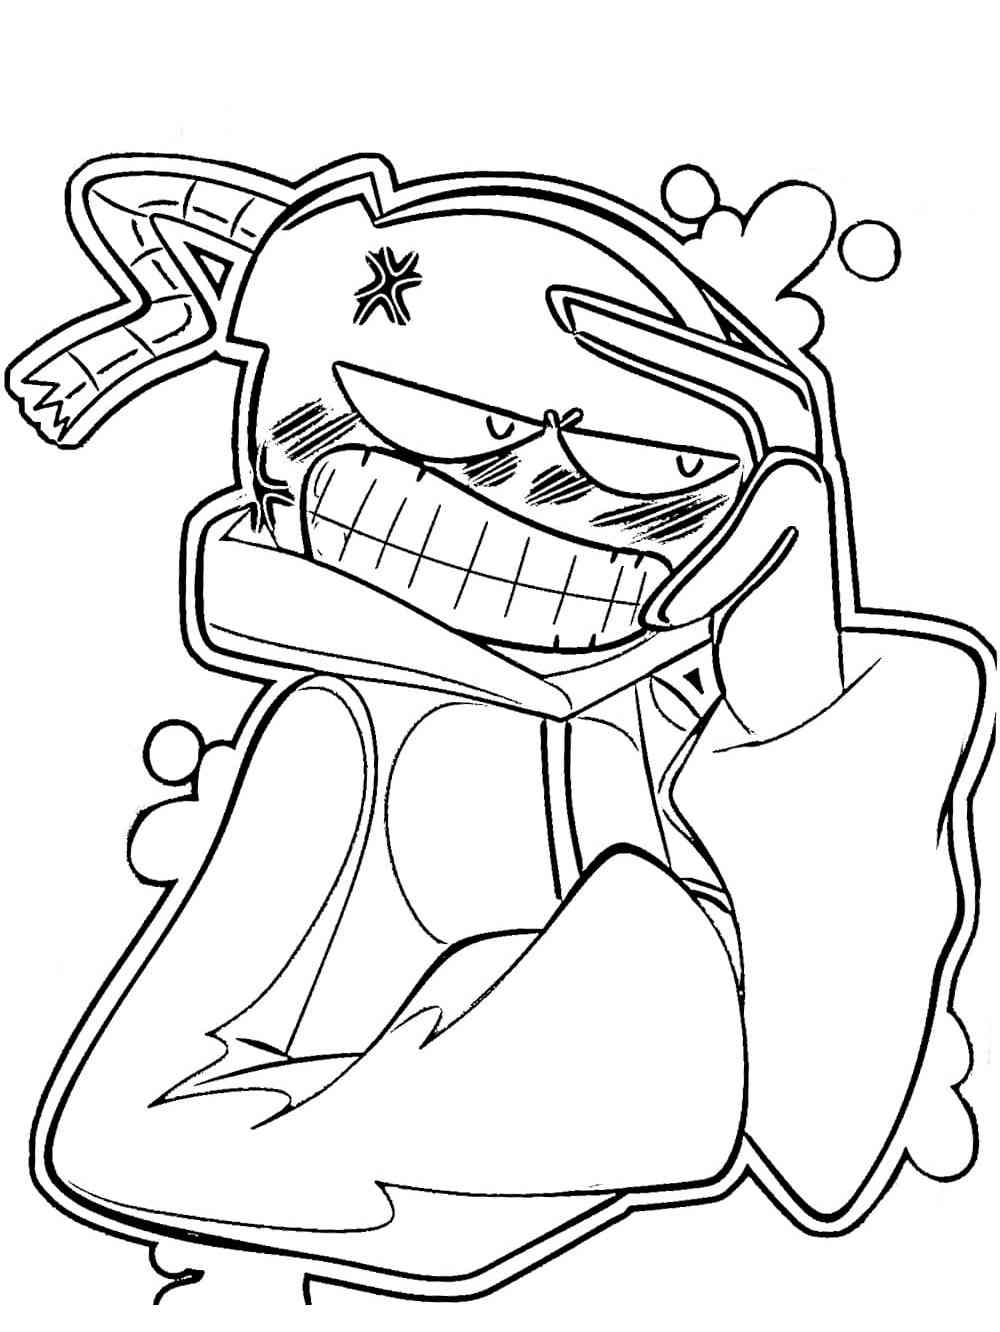 Friday Night Funkin Whitty coloring page